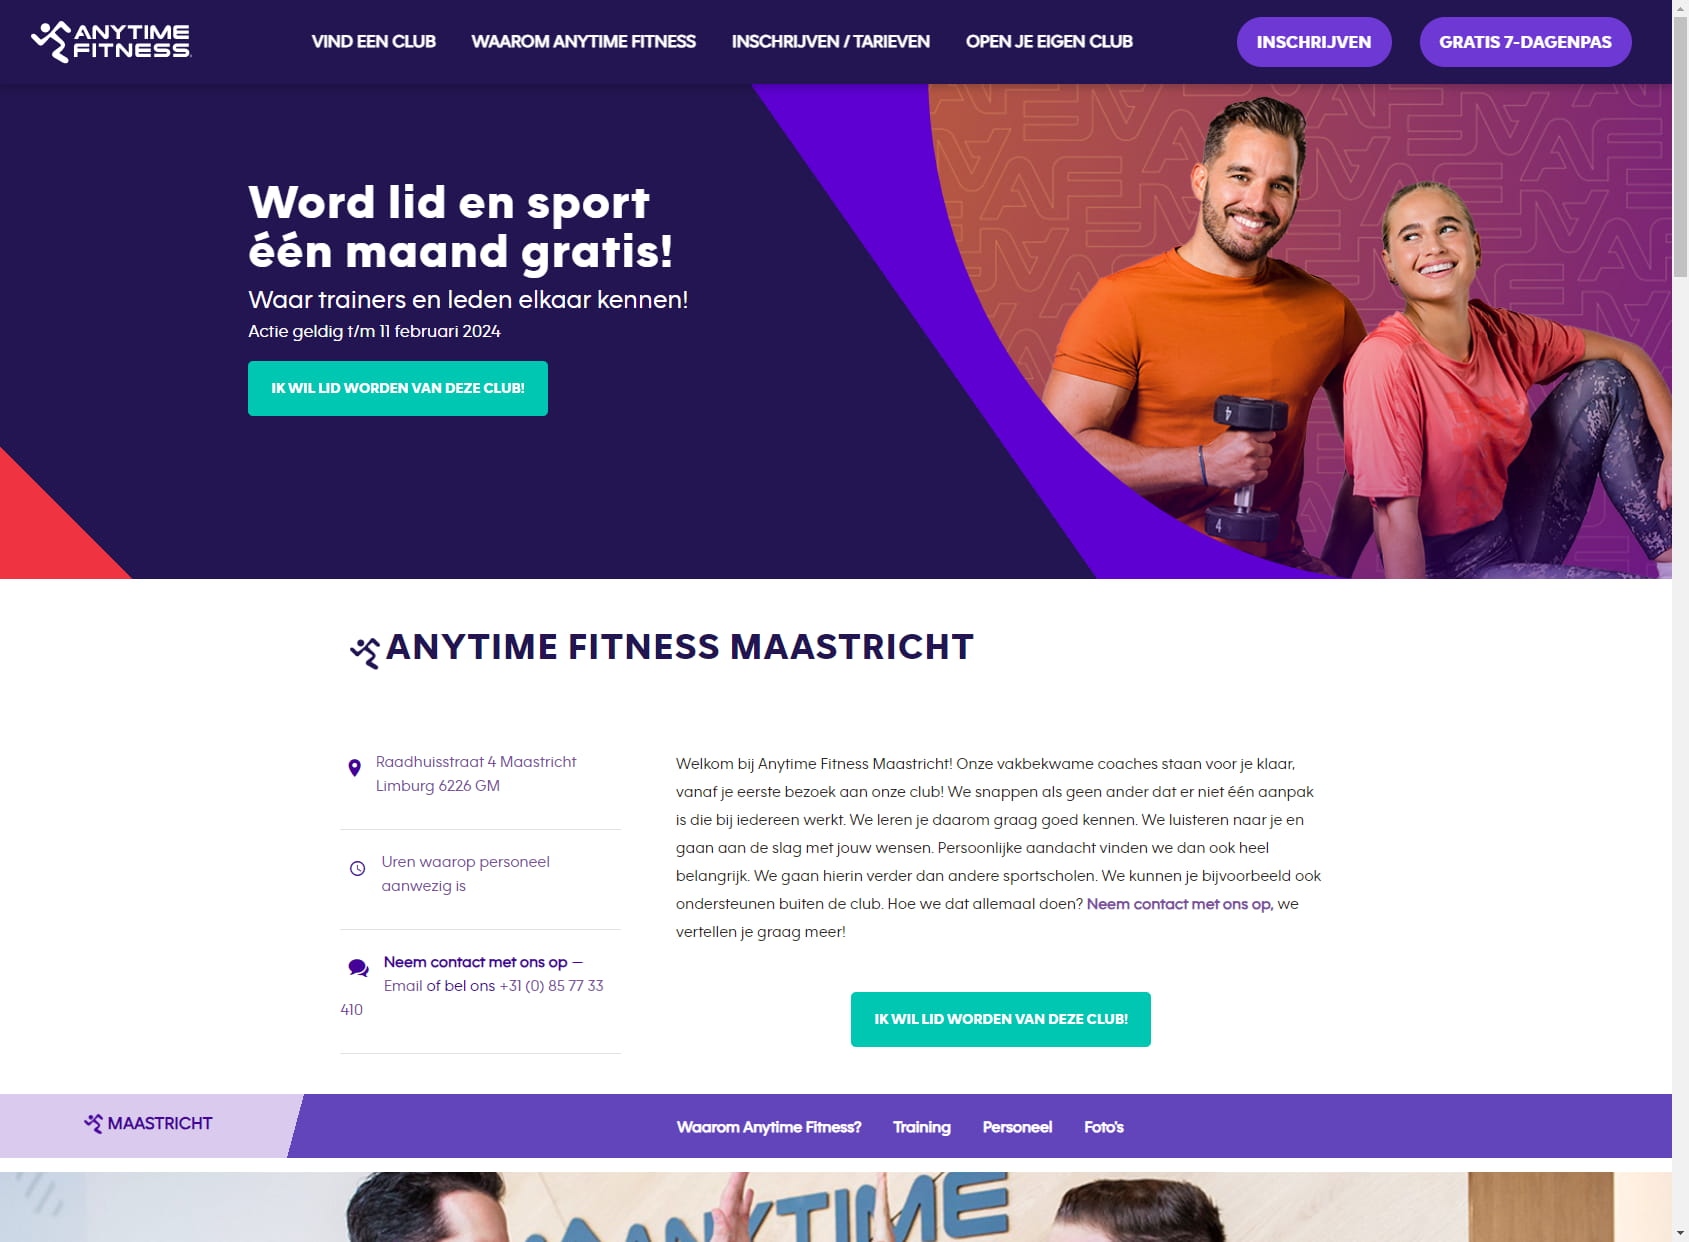 Anytime Fitness Maastricht